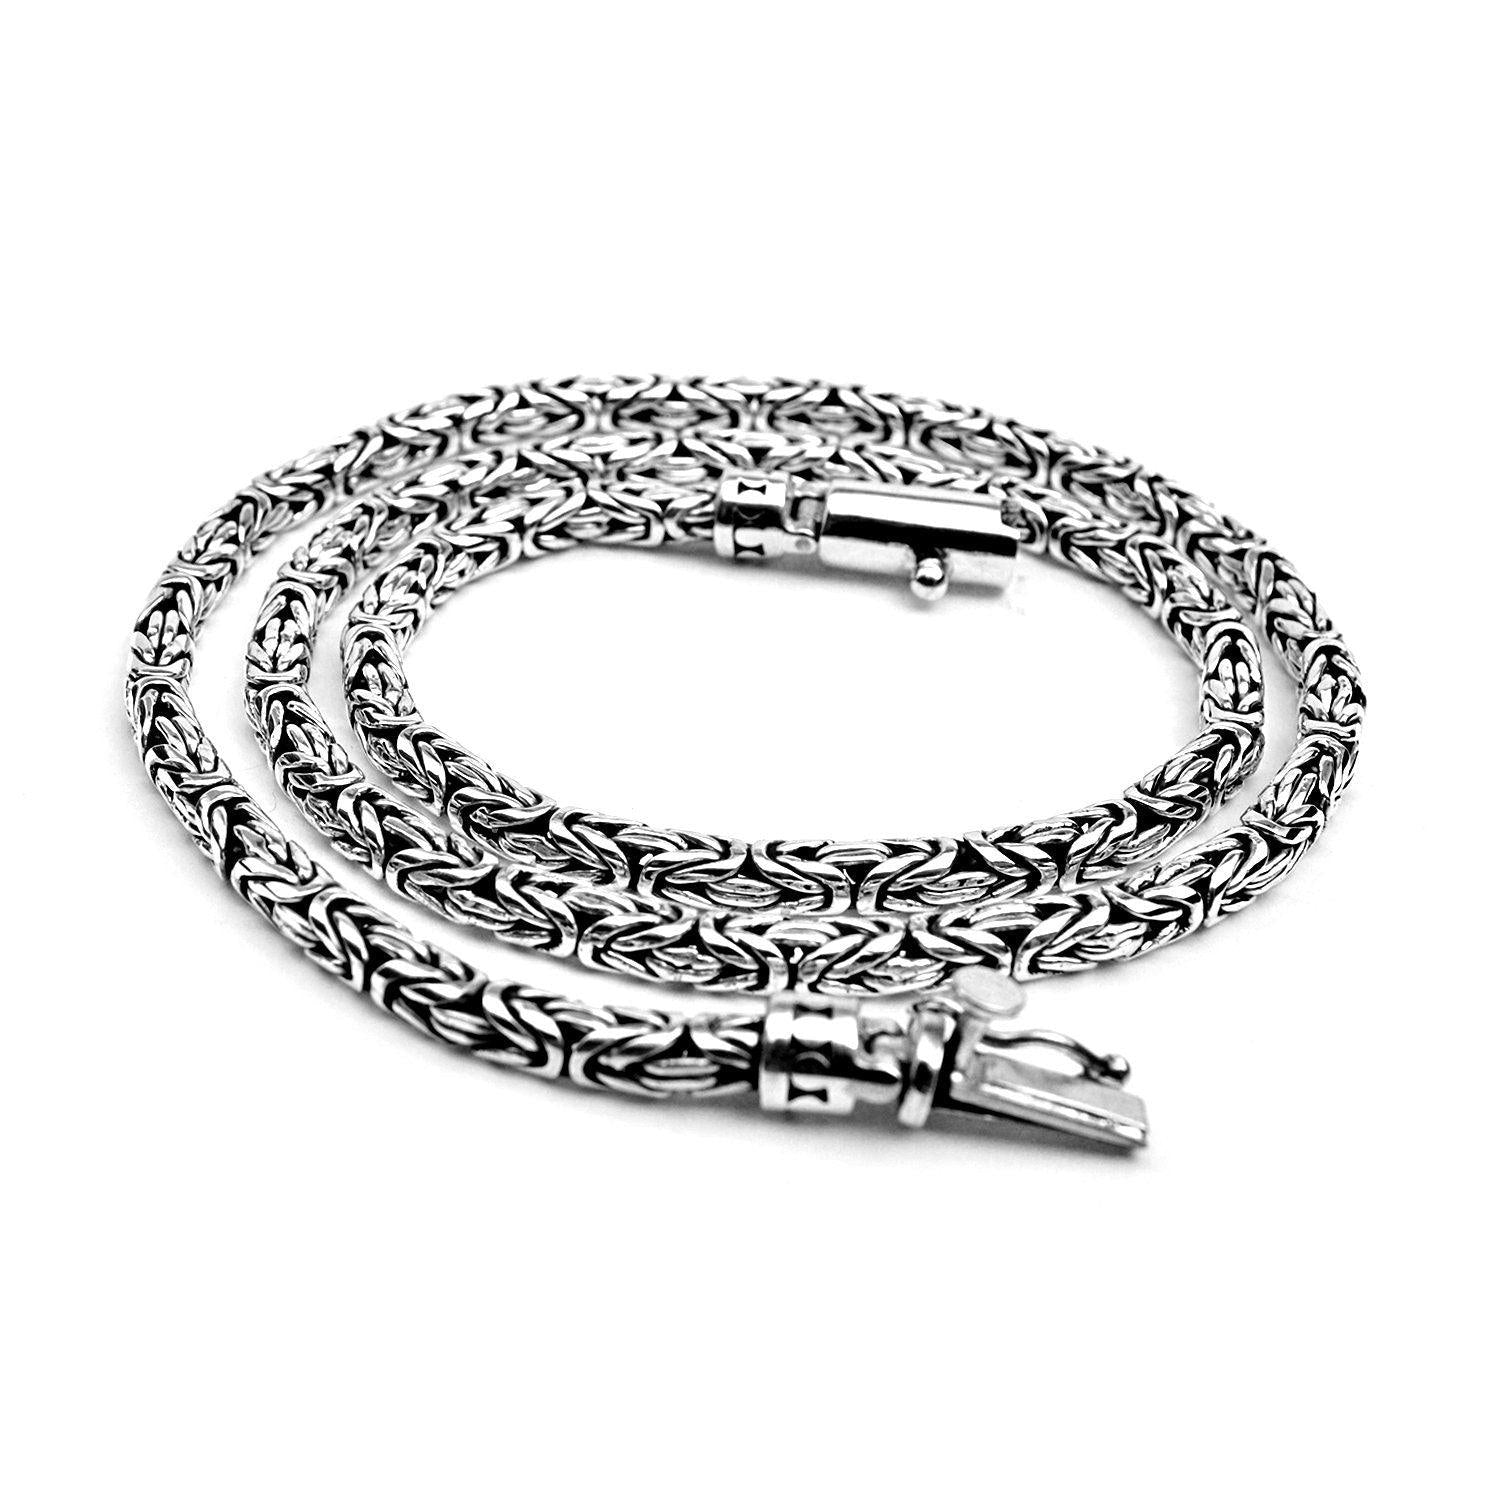 Handmade Solid 925 Sterling Silver BYZANTINE Chain Necklace 4mm ROUND 18"-20" weighs 44-48 Grams - Inspiring Jewellery